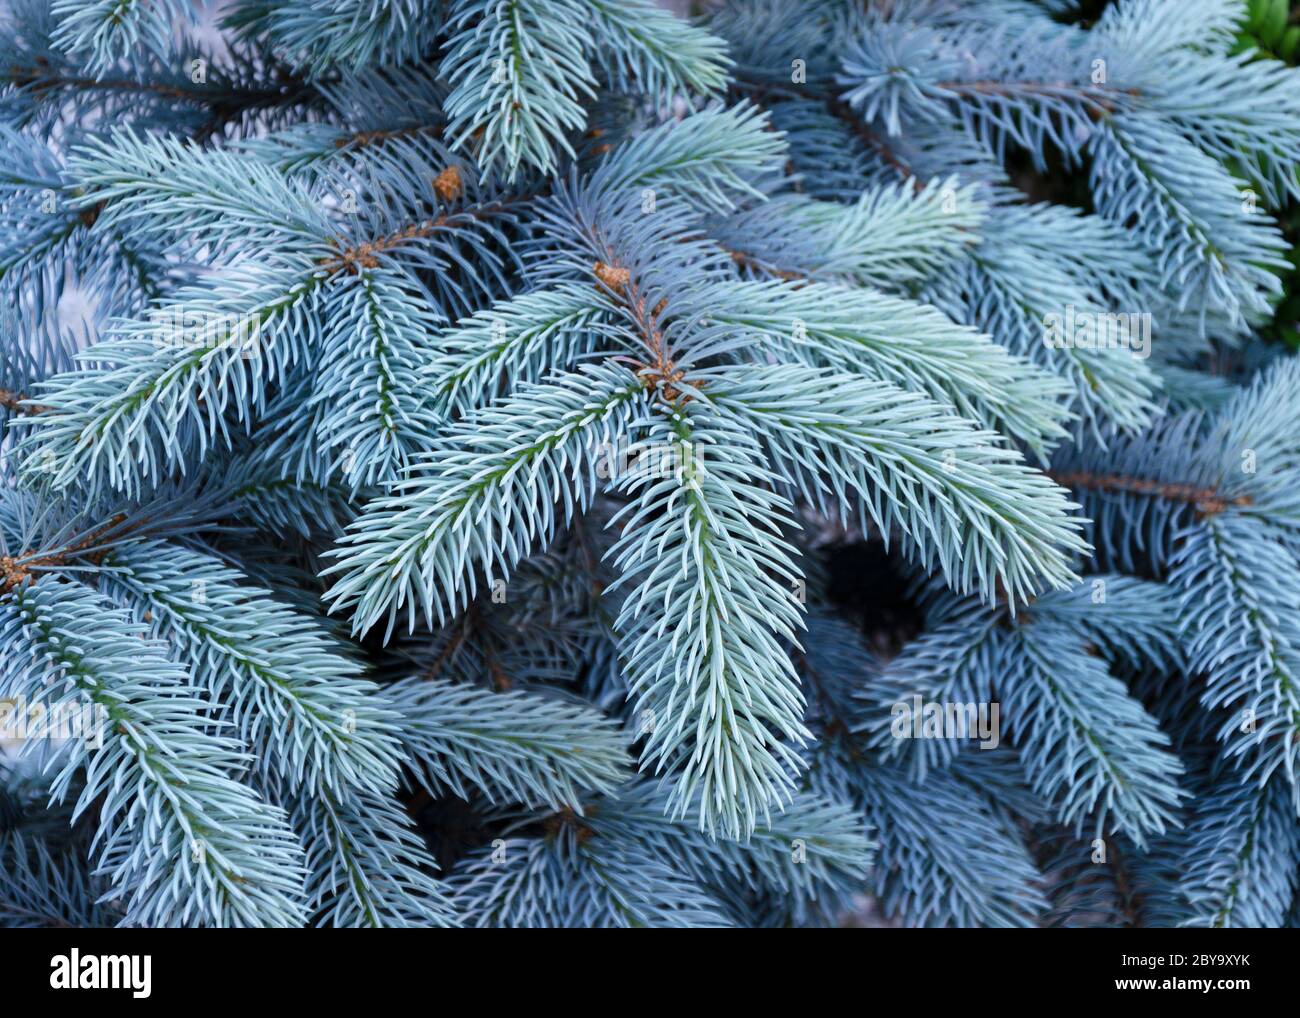 blue spruce tree with blue needles Stock Photo